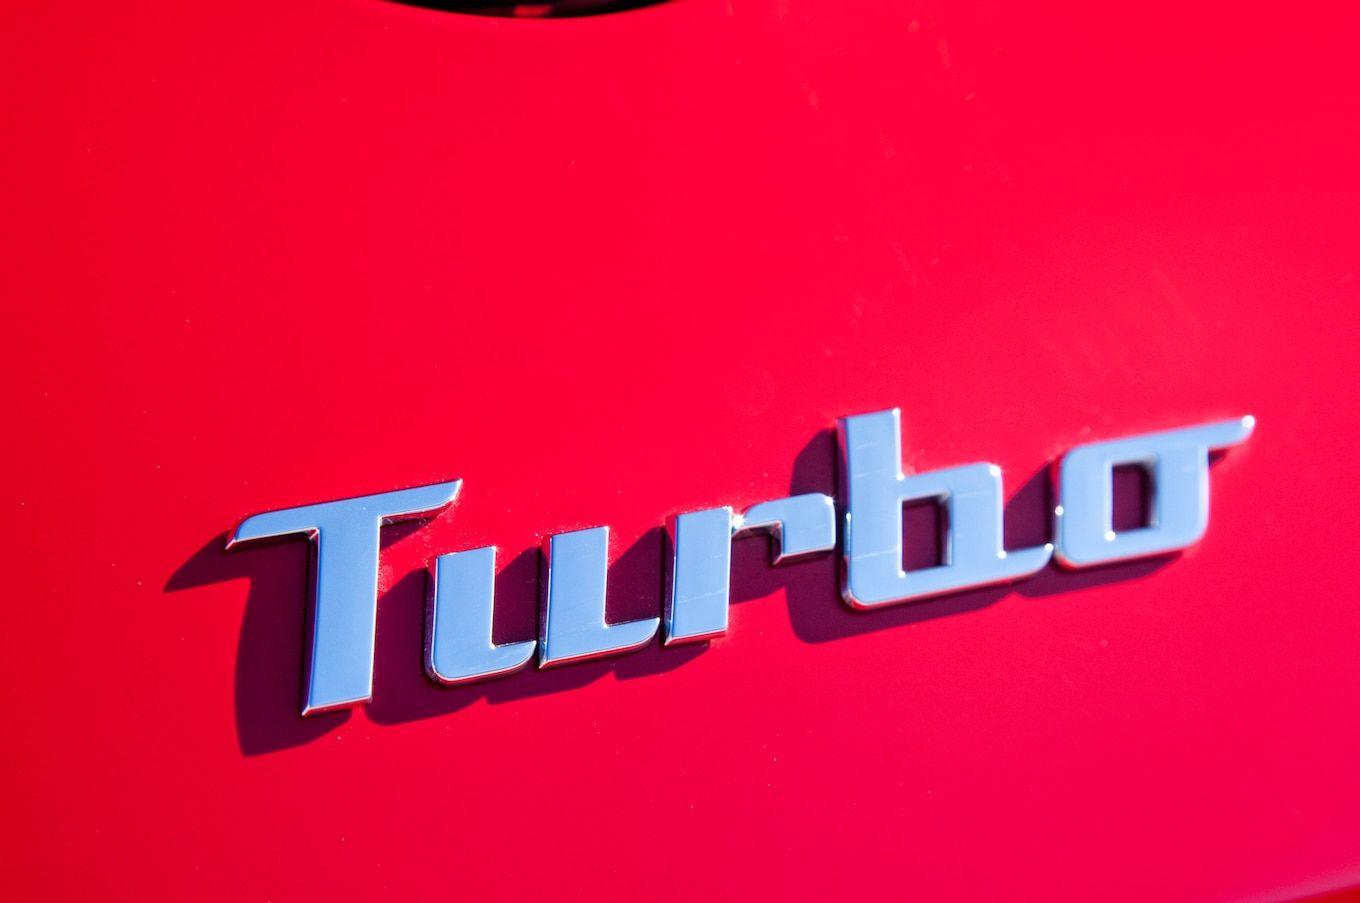 VW Turbo Logo - 2013 Volkswagen Beetle Reviews and Rating | Motortrend